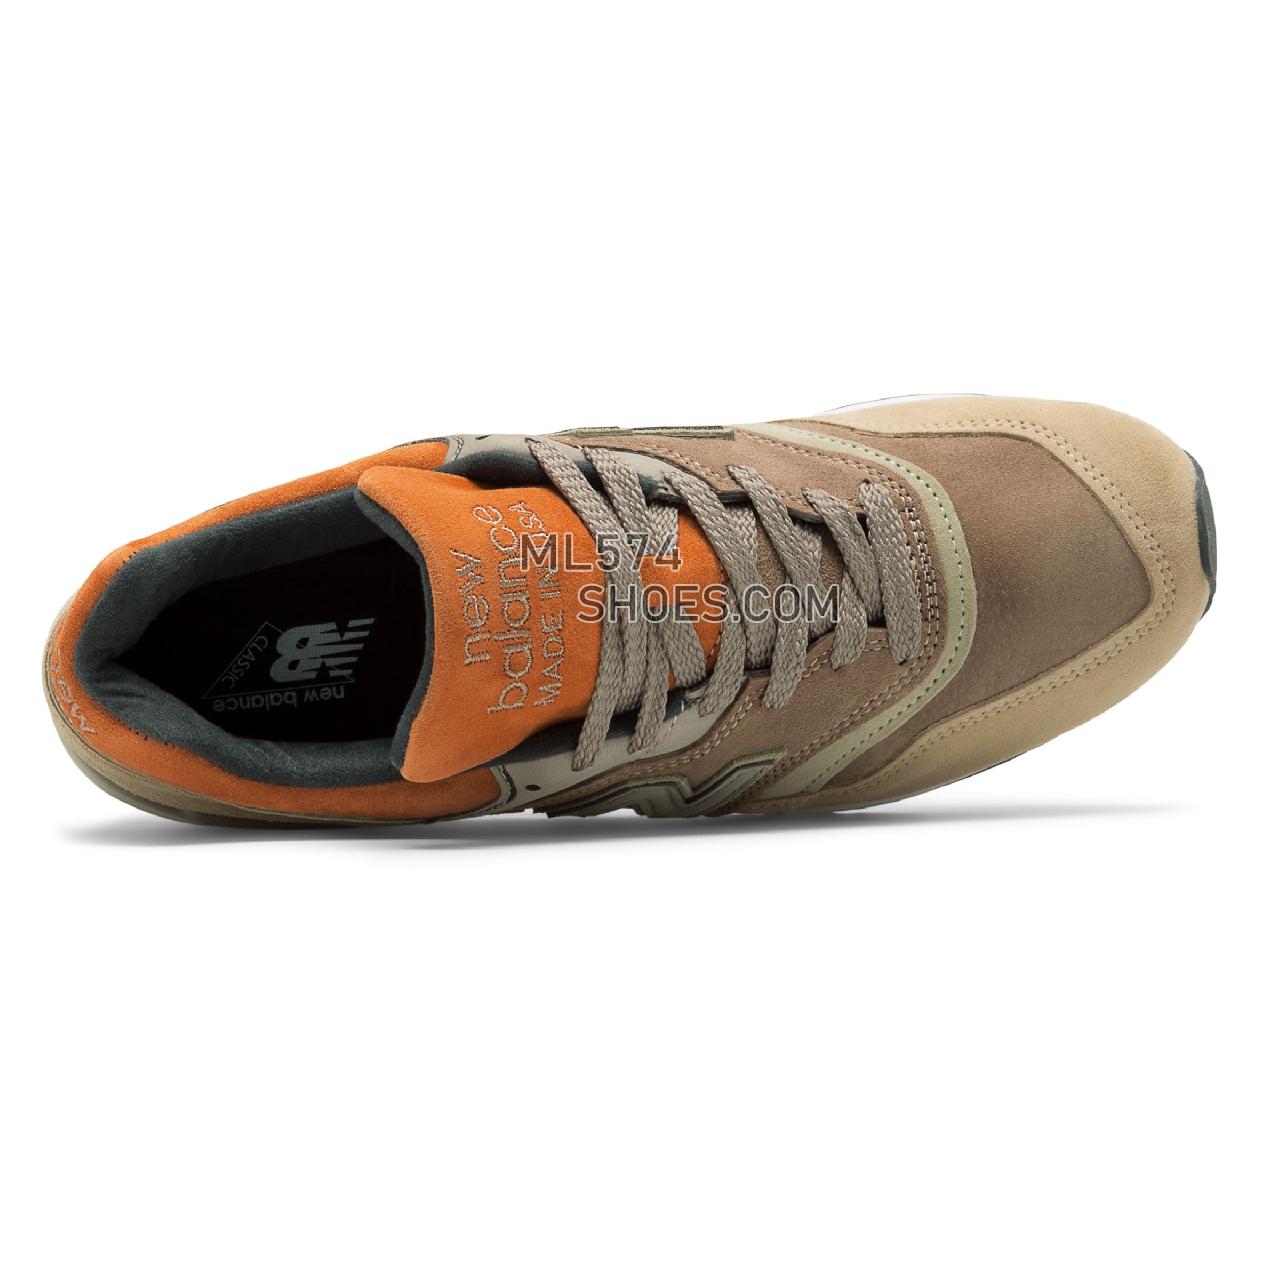 New Balance Made in US 997 - Men's Made in US 997 Classic - Tan with Brown - M997NAJ